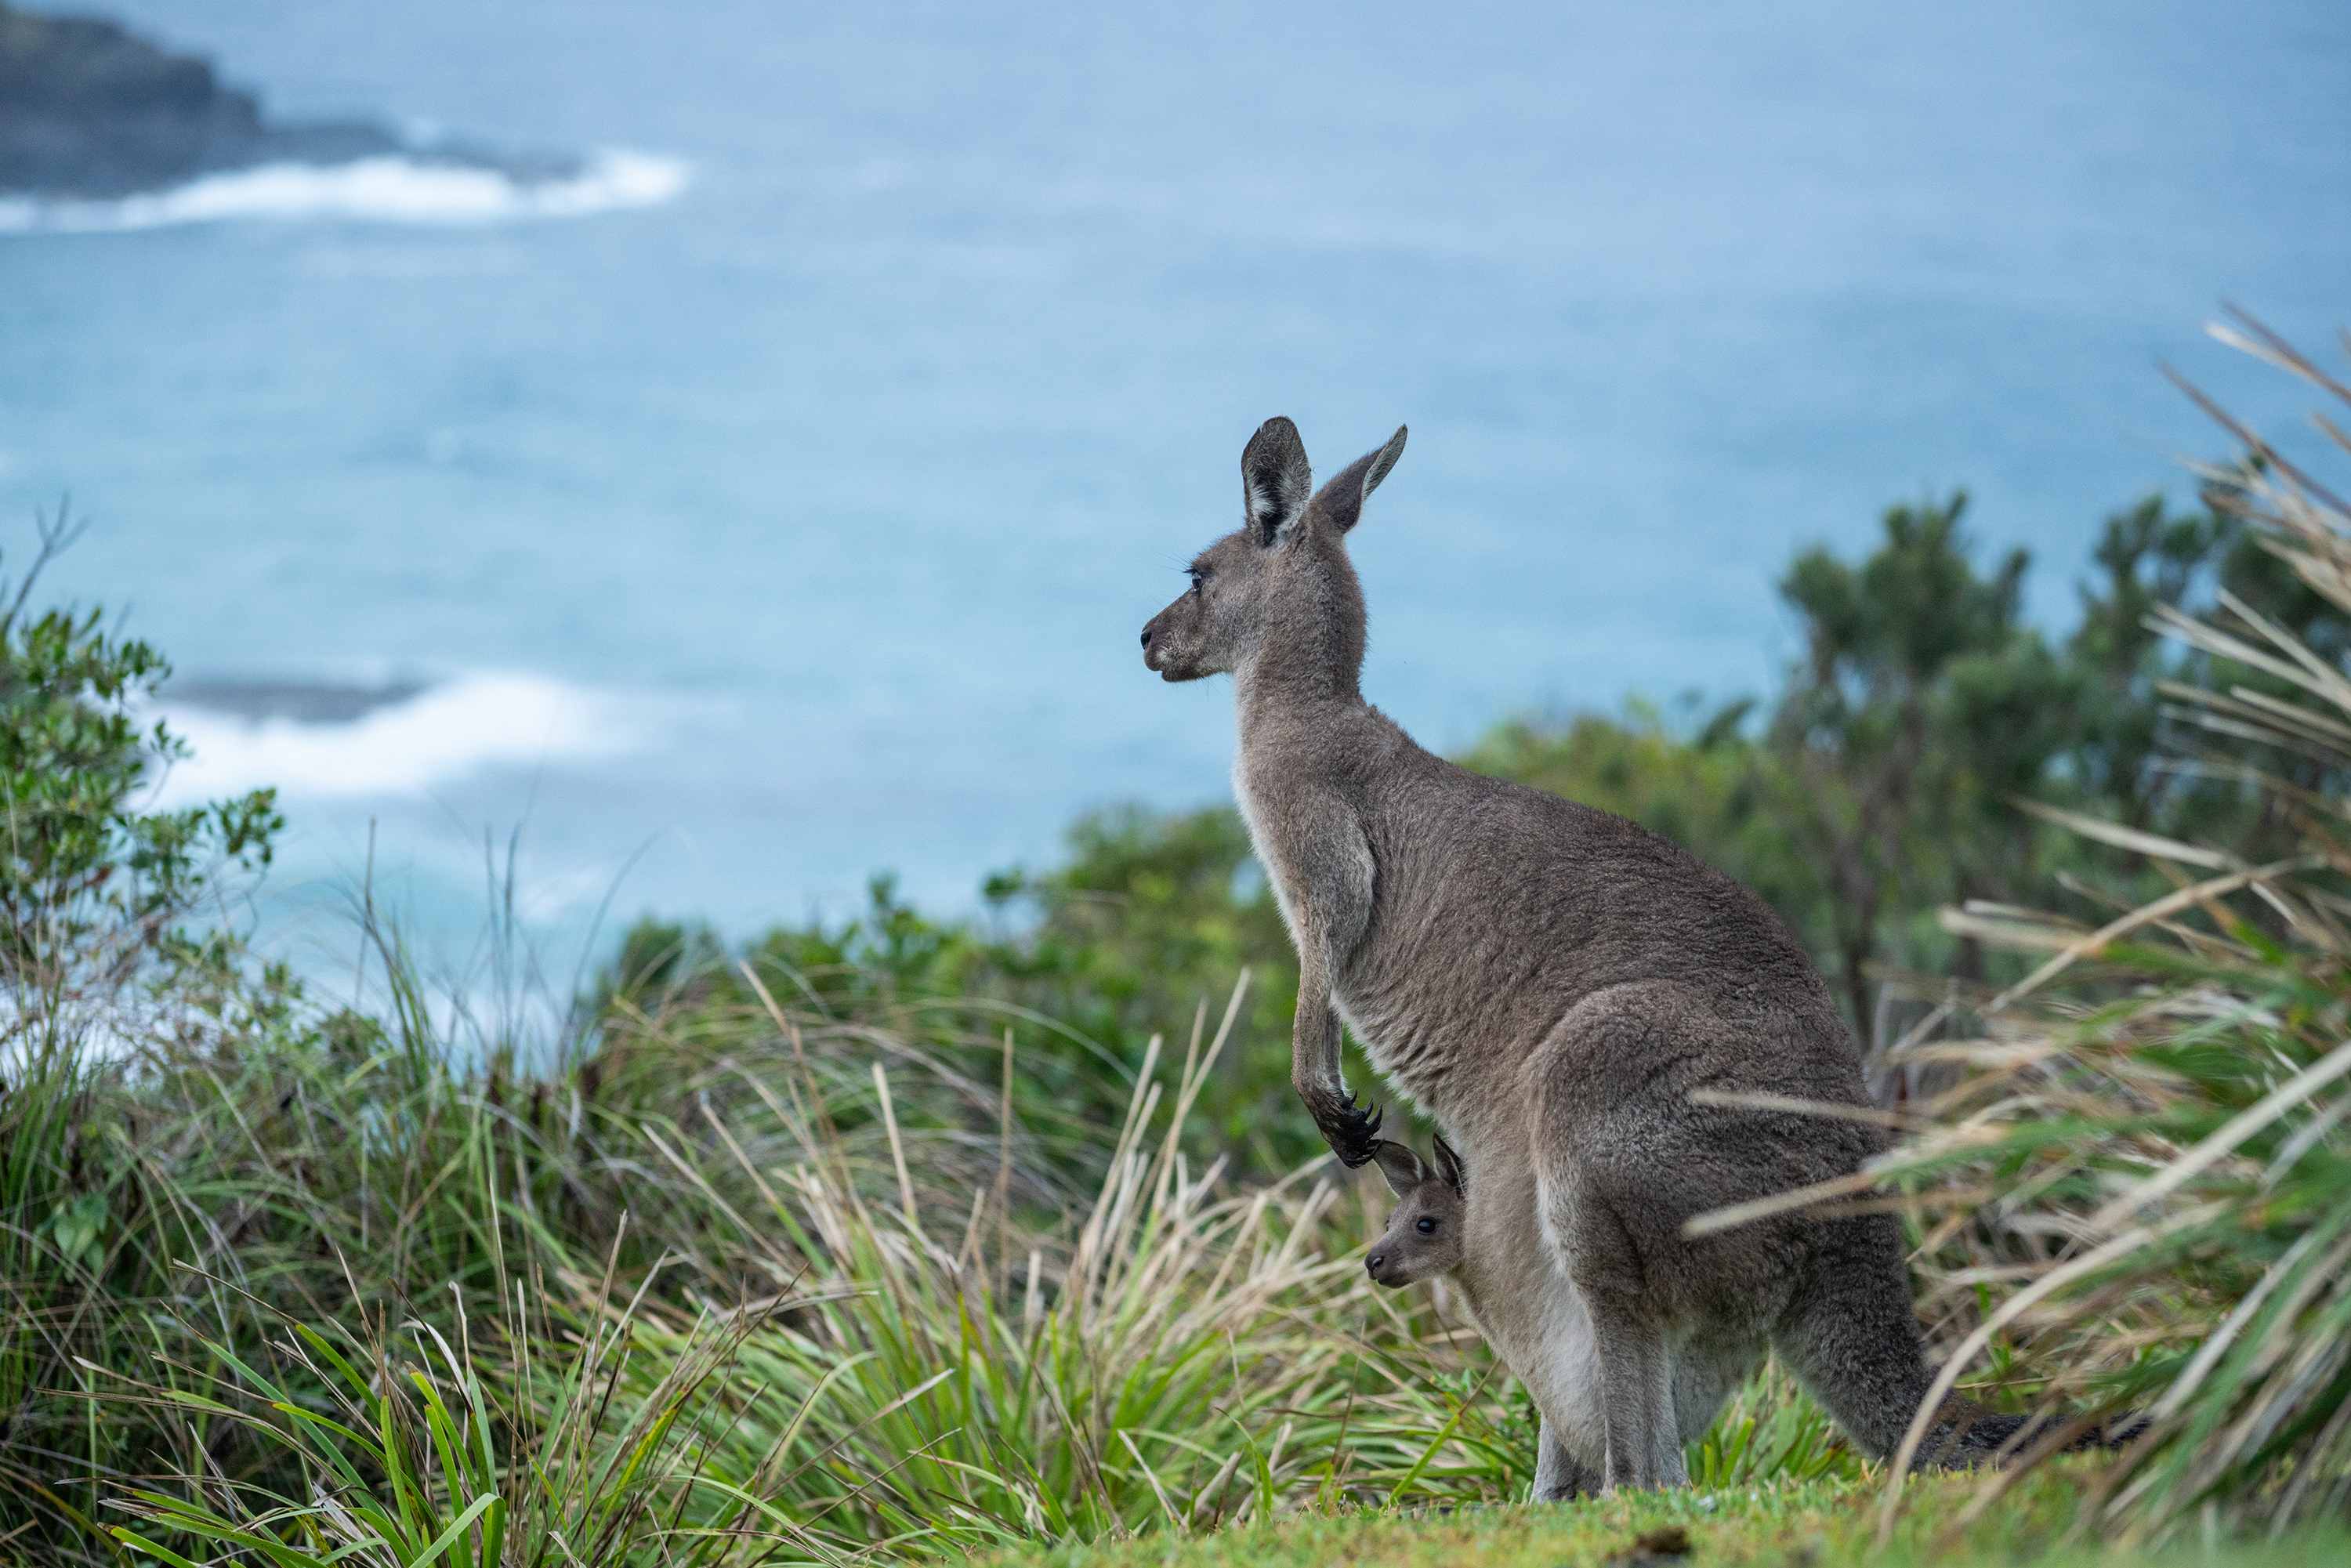 Kangaroo with joey in Hat Head National Park. Photo credit: Rob Mulally/DPIE